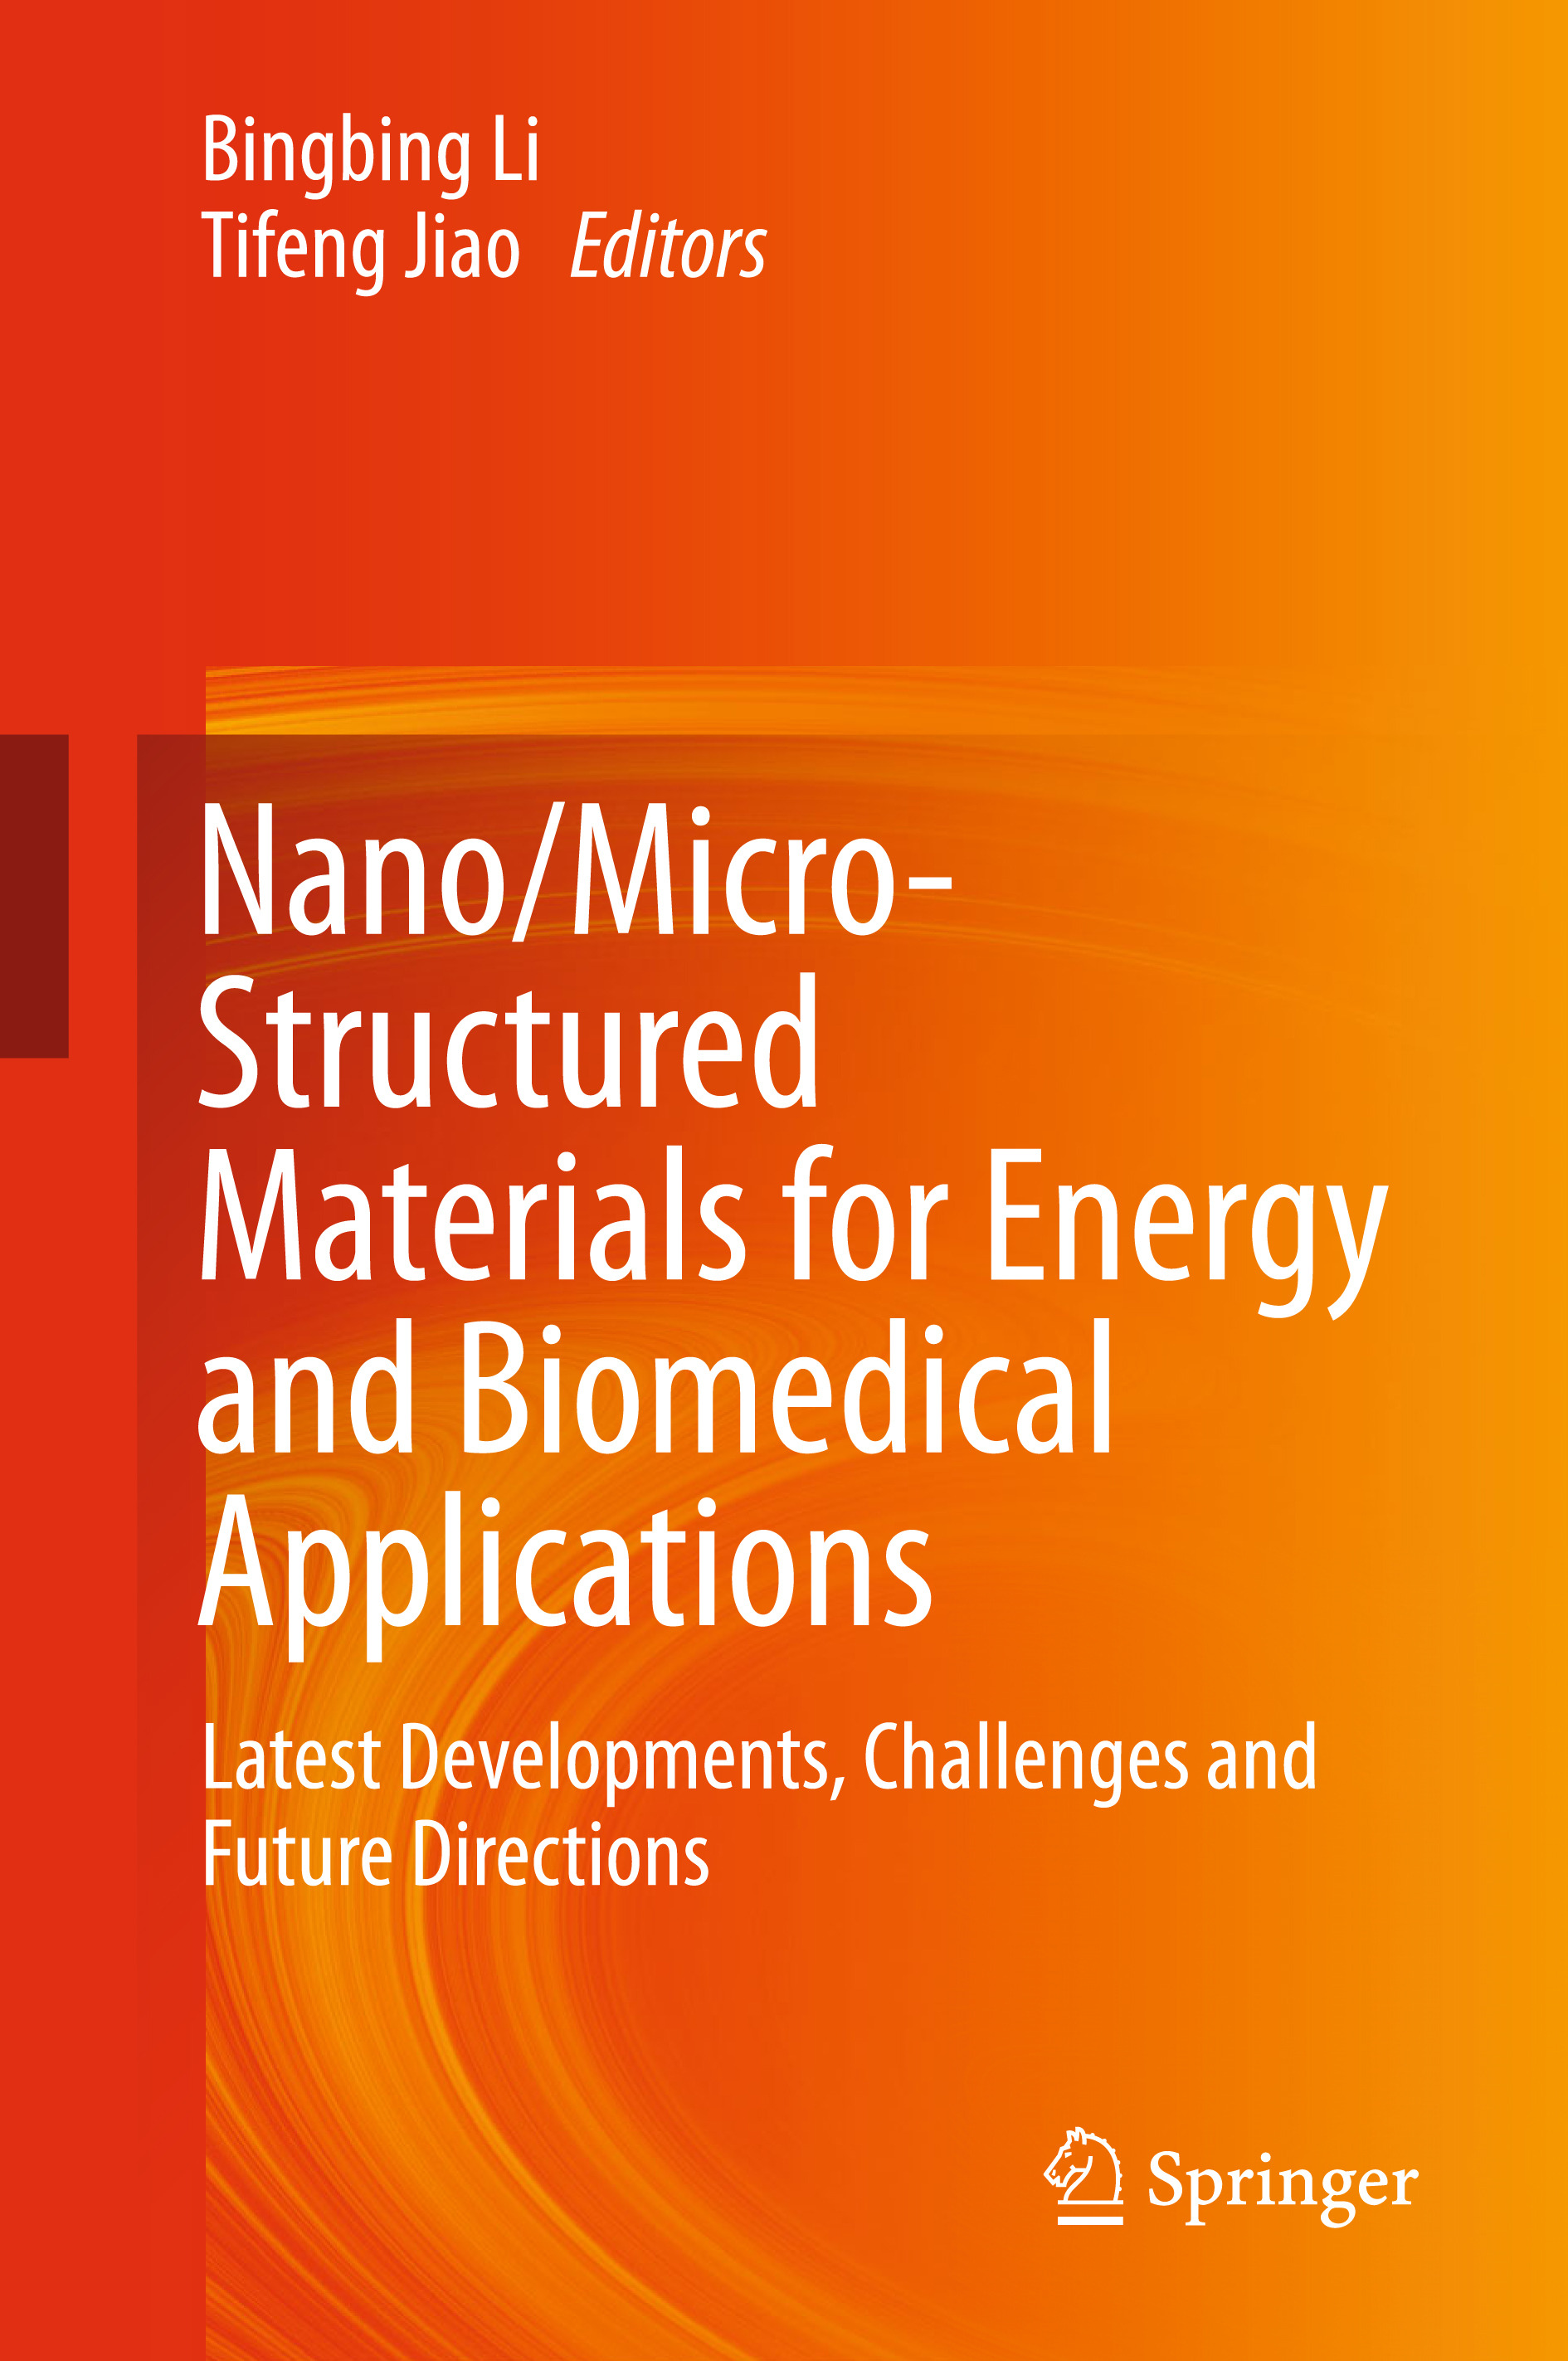 Jiao, Tifeng - Nano/Micro-Structured Materials for Energy and Biomedical Applications, ebook